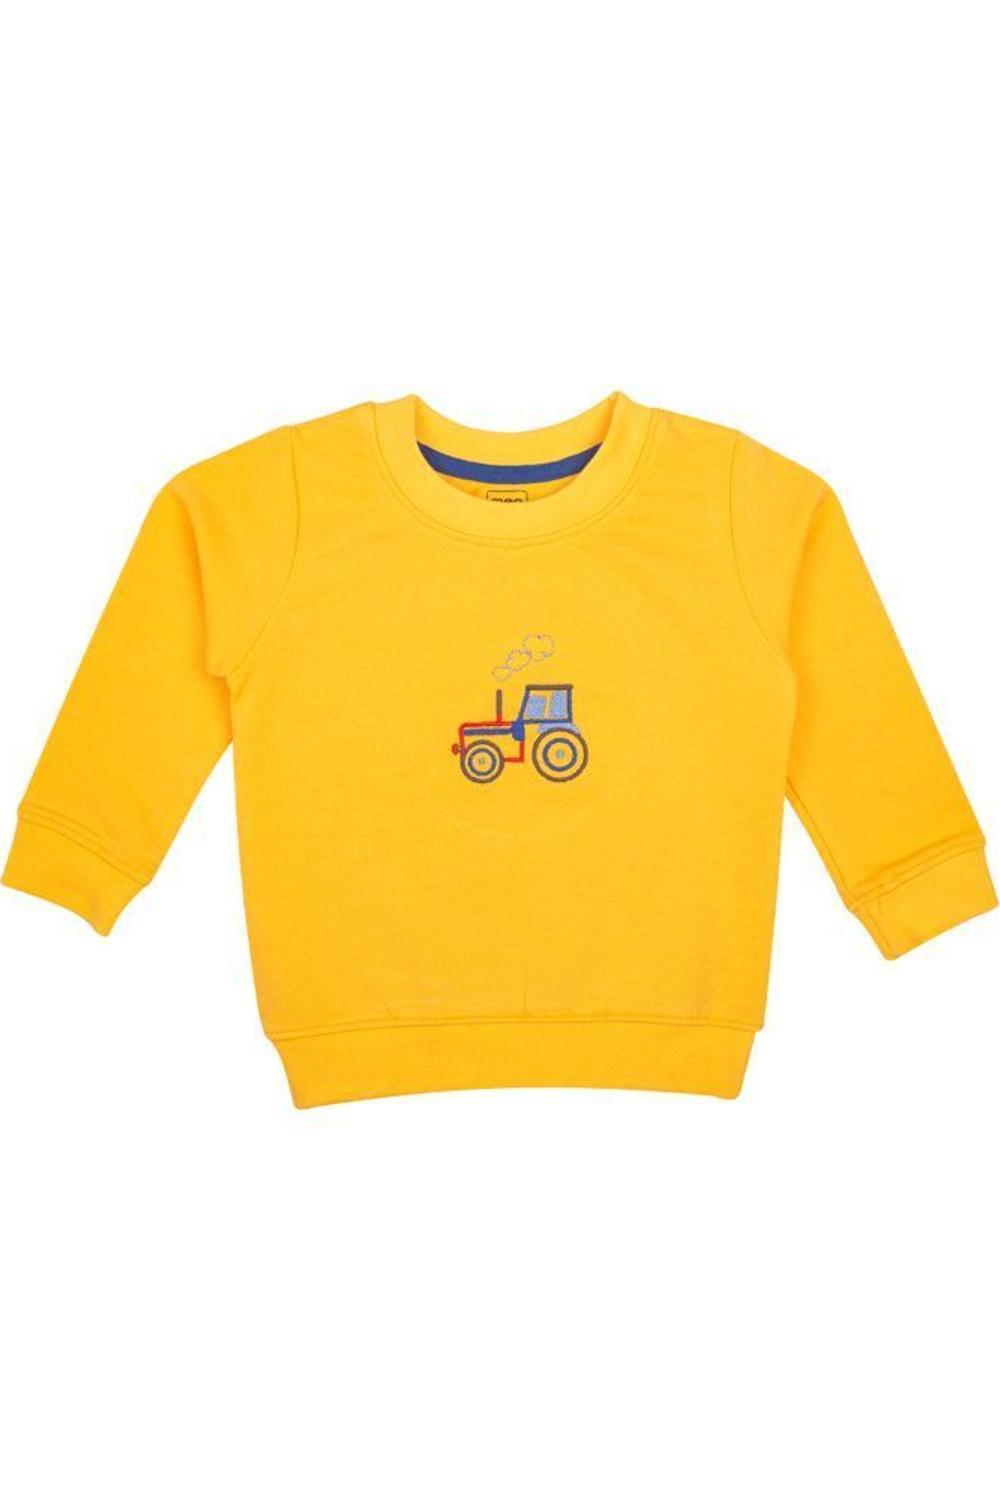 Mee Mee Solid Knit Boys T-Shirt